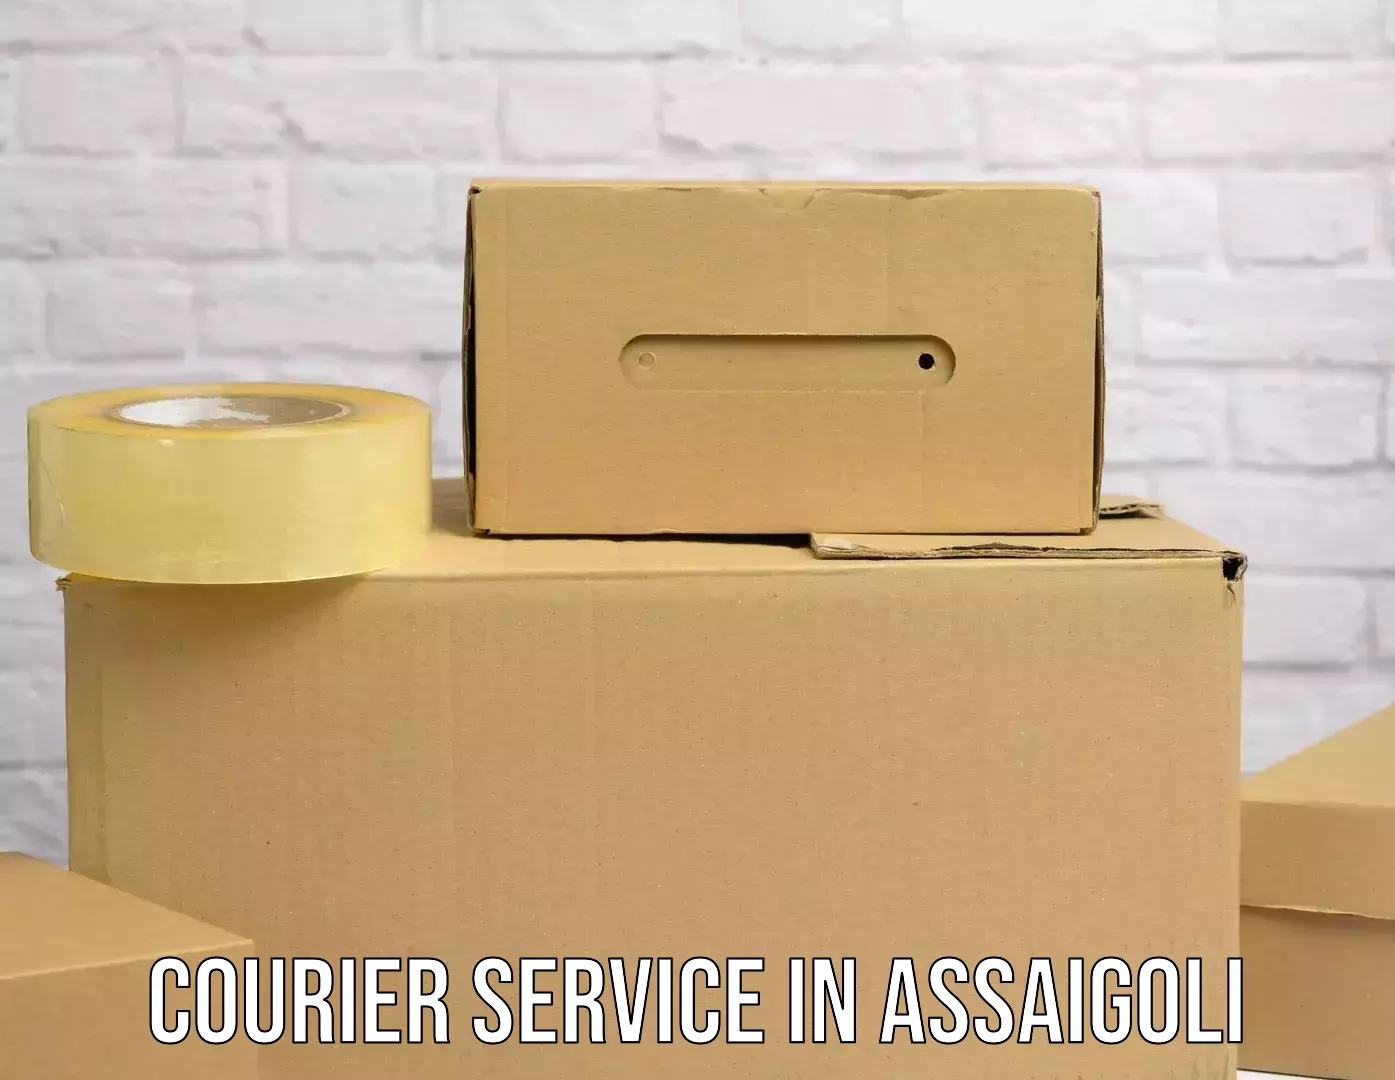 Fastest parcel delivery in Assaigoli